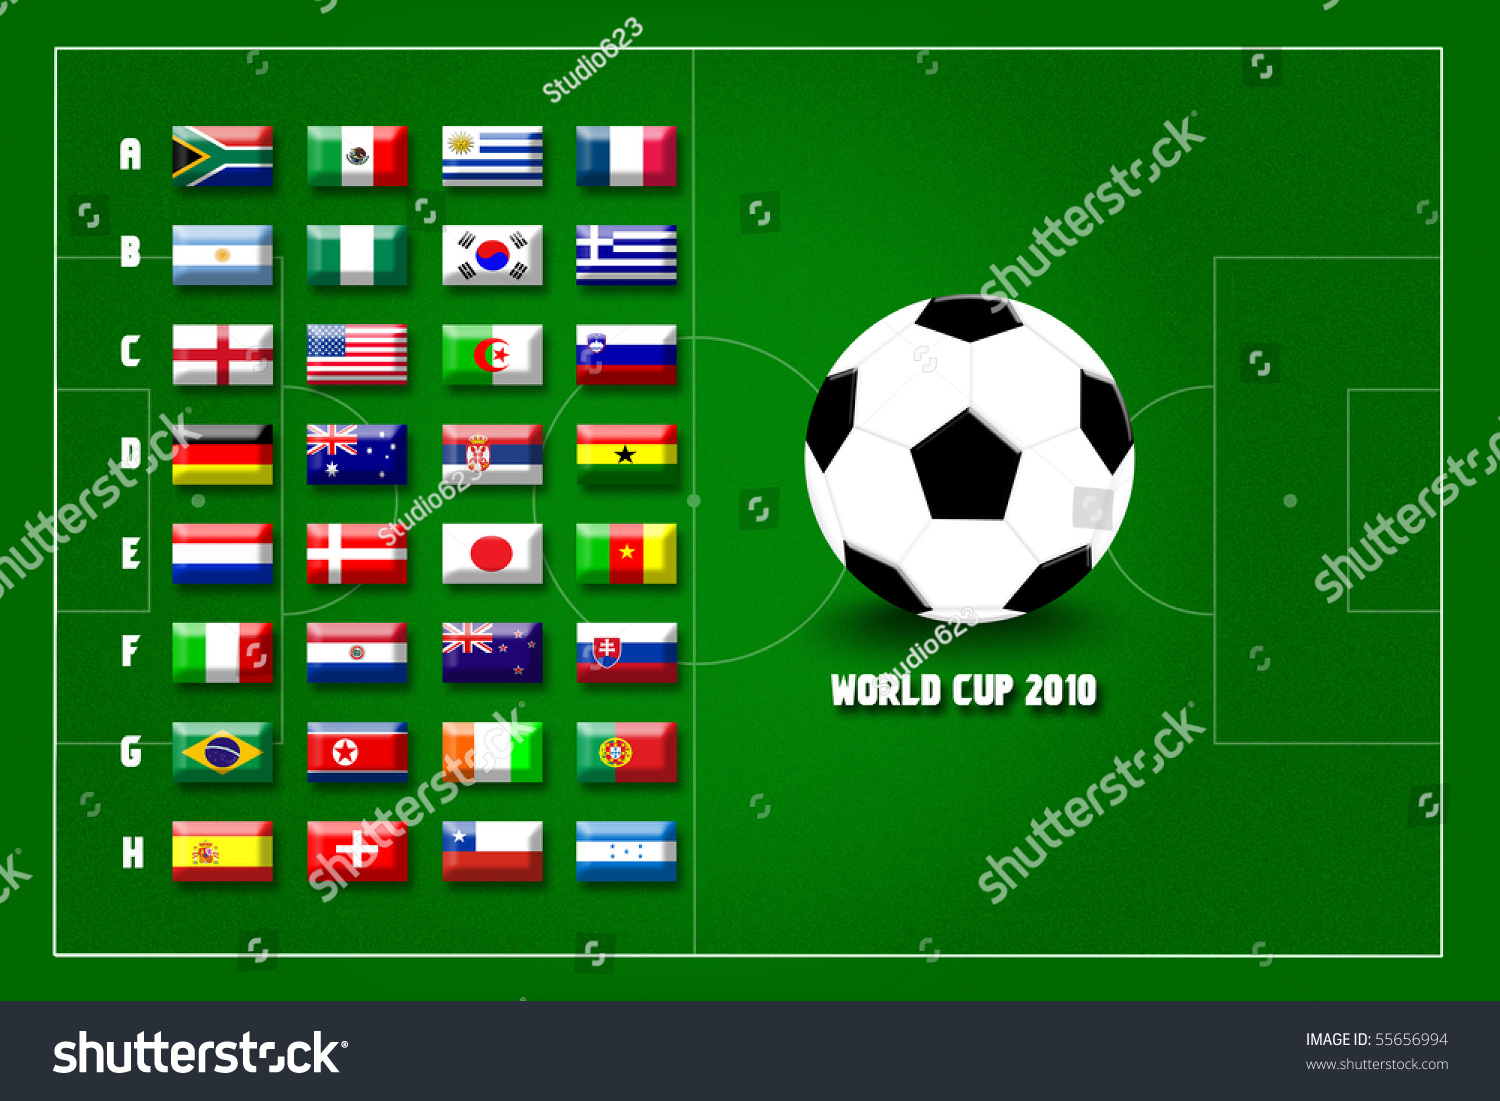 32 Teams Of World Cup 2010 By Group Stock Photo 55656994 Shutterstock